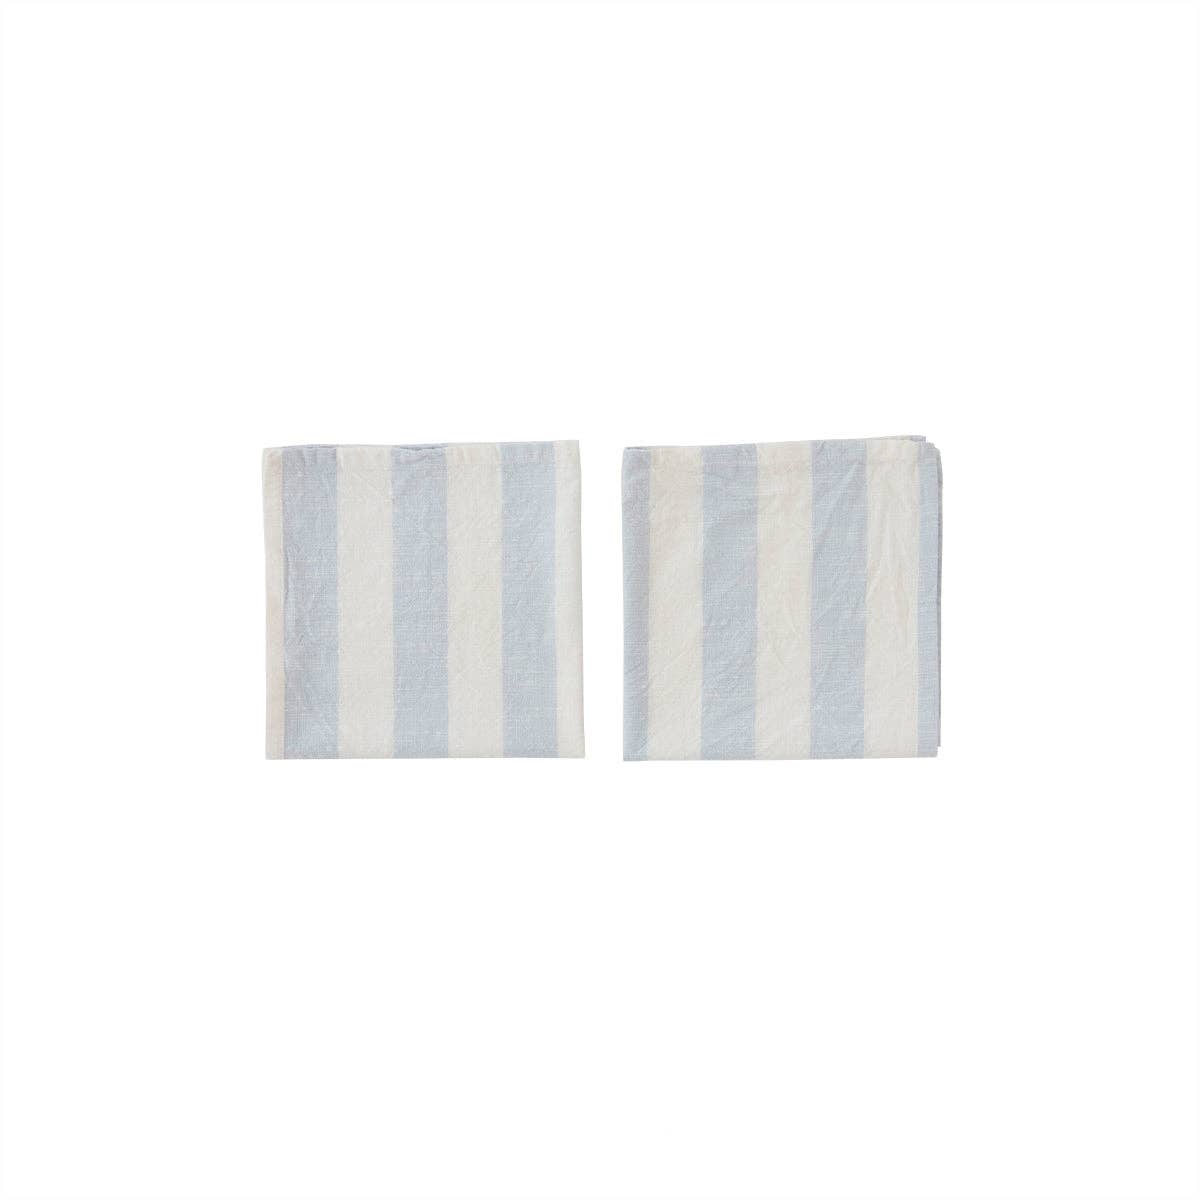 OYOY LIVING DESIGN - Striped Napkin - Pack of 2 - Ice Blue